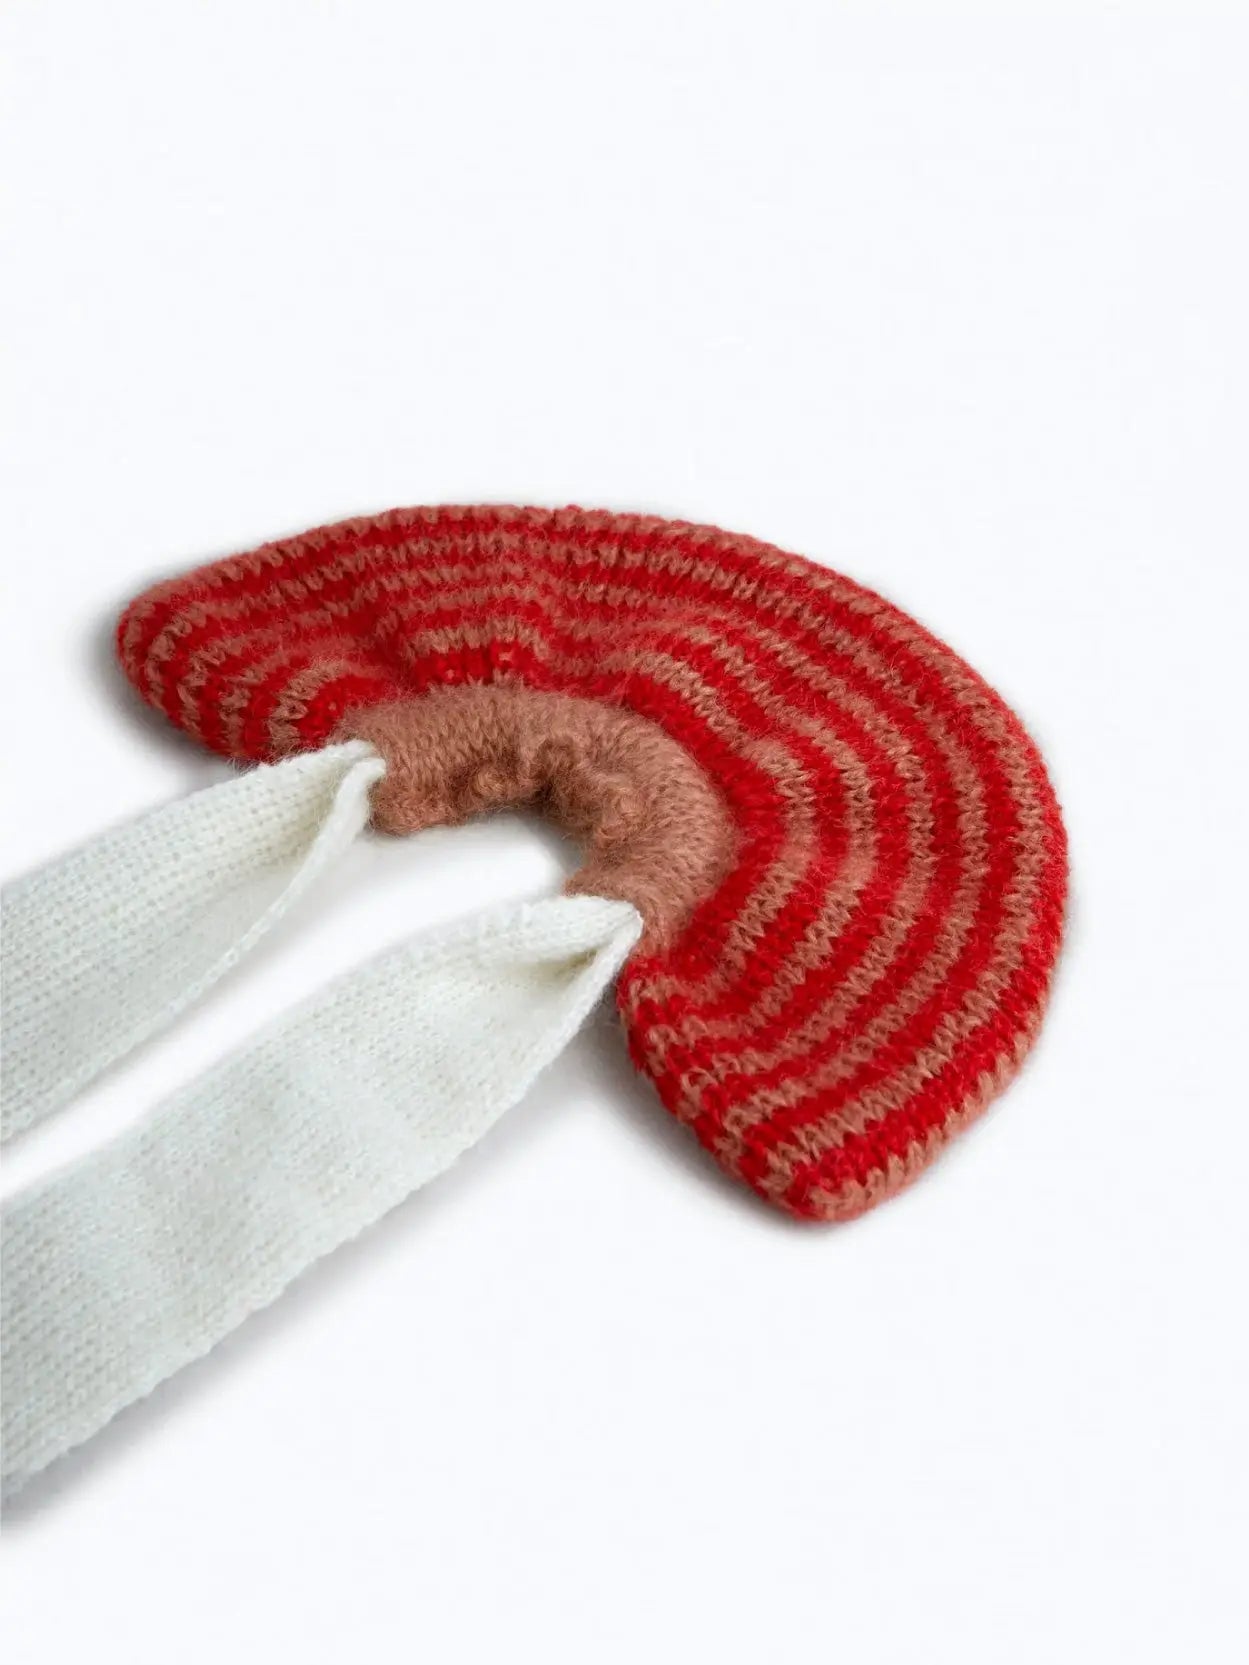 A whimsical Amapola Mohair Bow Scrunchie from Tomasa, colored in red and pink stripes, features long white knitted ties extending downwards. The scrunchie has a unique semi-circular shape, reminiscent of a rainbow. Available at our Barcelona store, the long ties are designed to wrap around for added warmth and style.